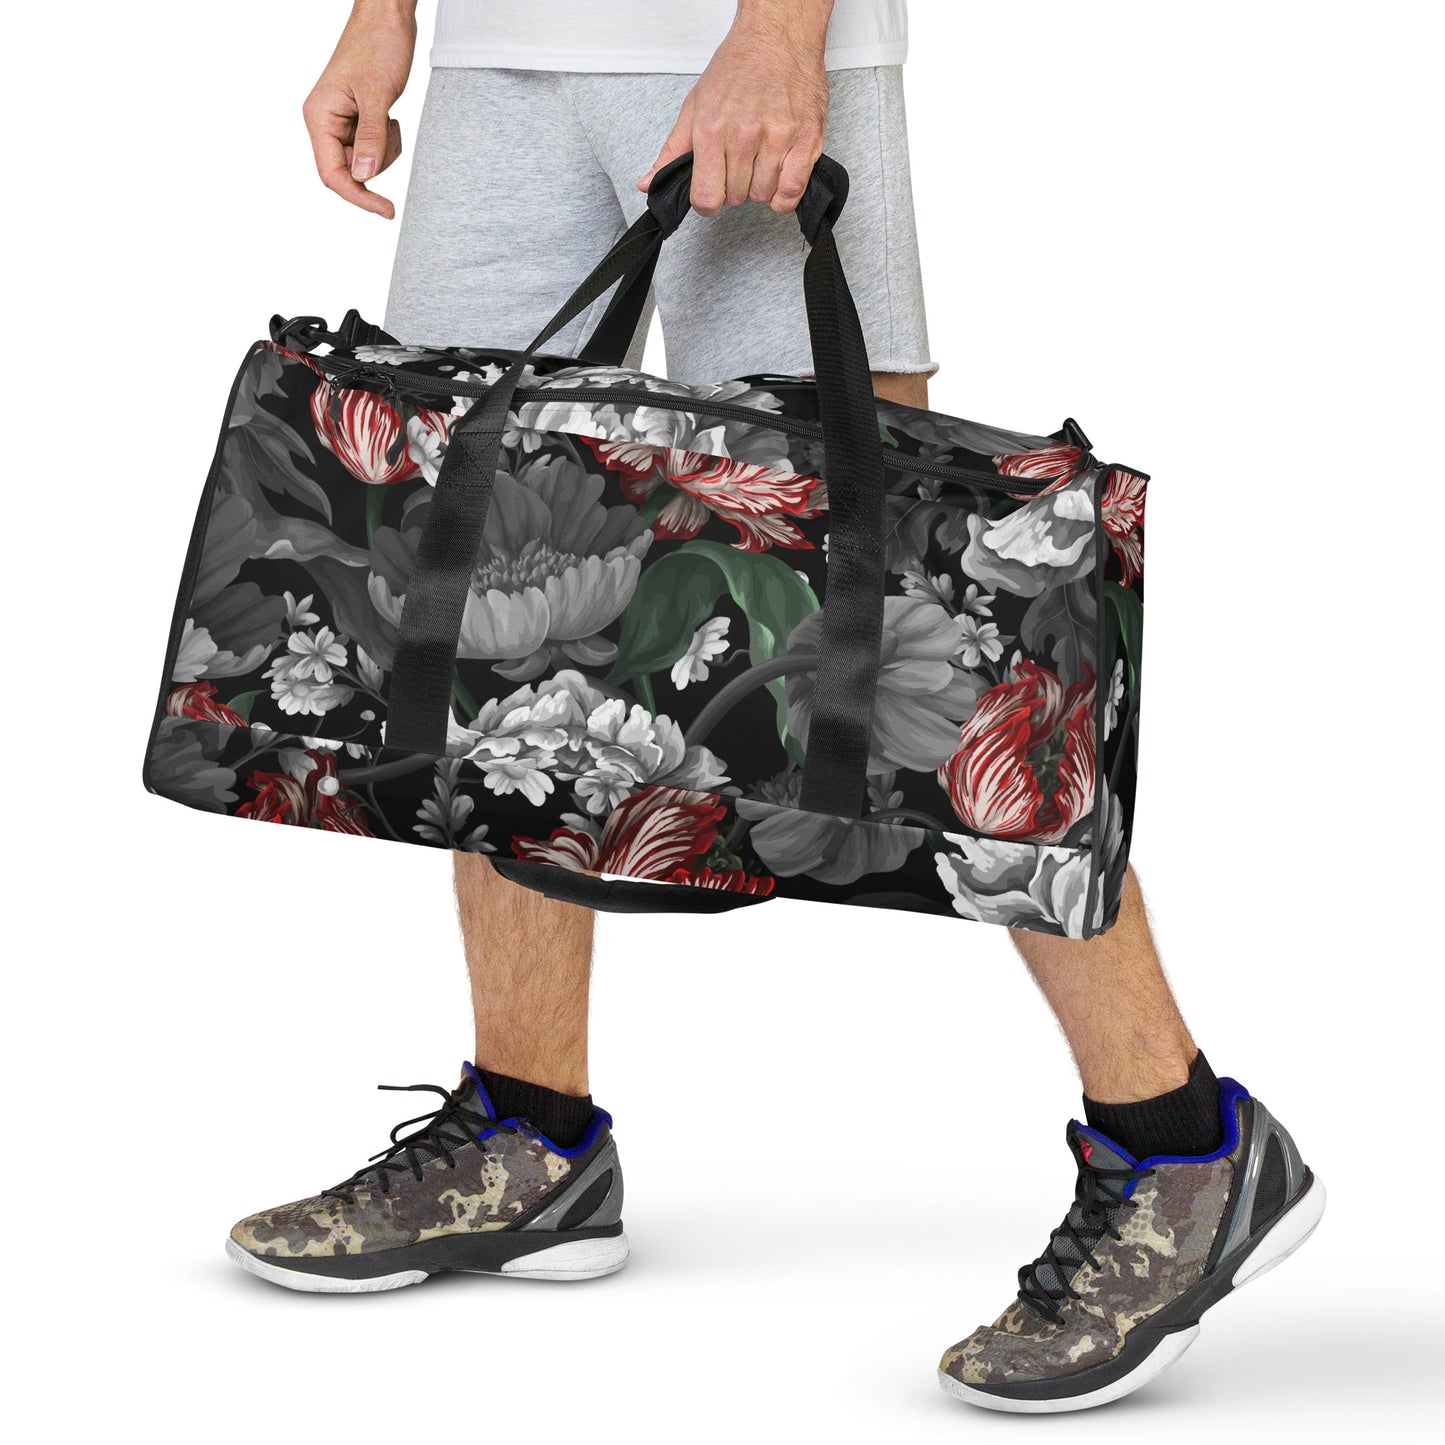 Gothic Black and Red Peony Duffle bag CedarHill Country Market